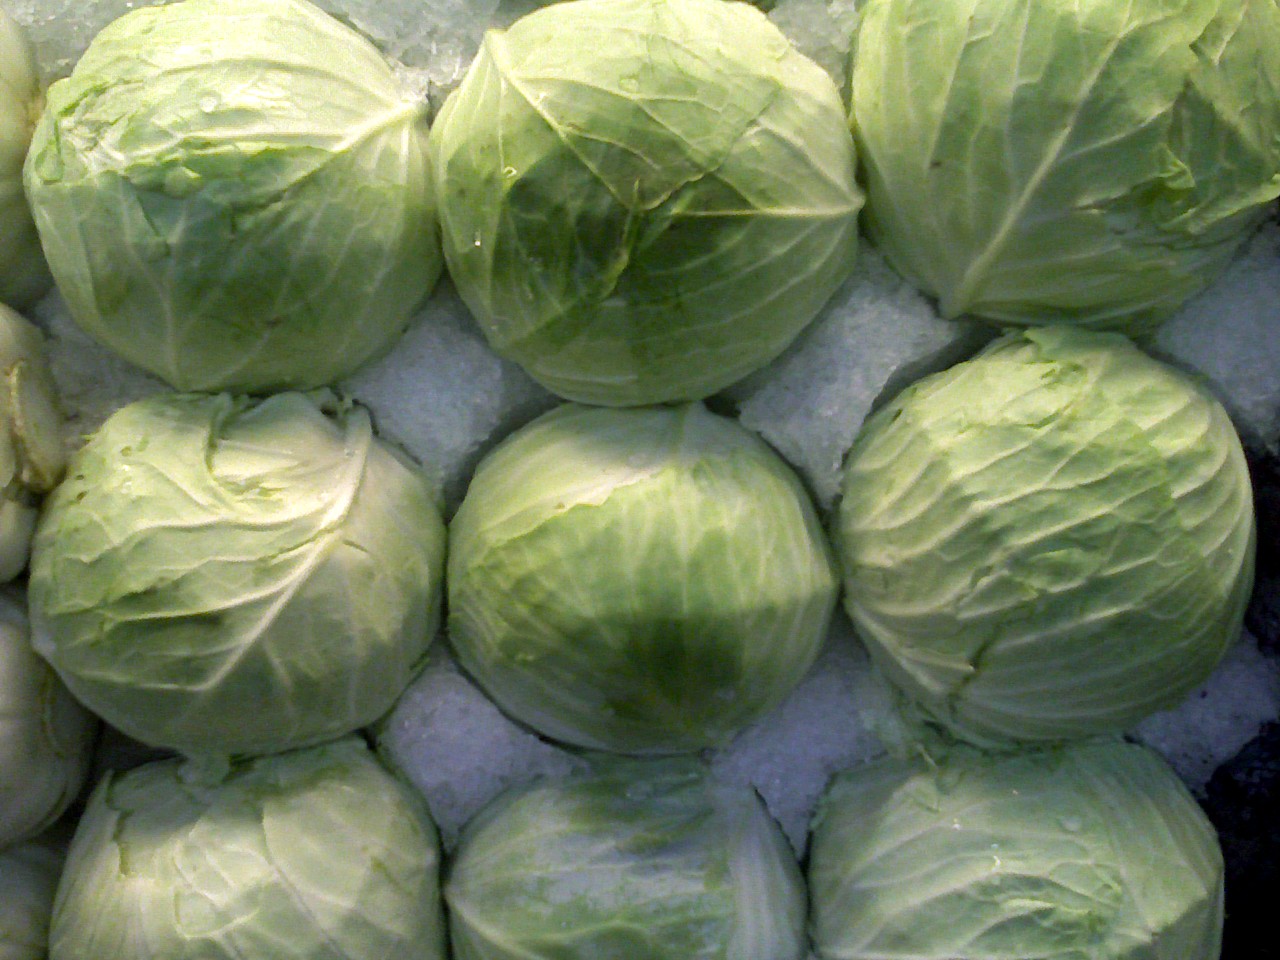 Cabbages stacked in ice at Central Market